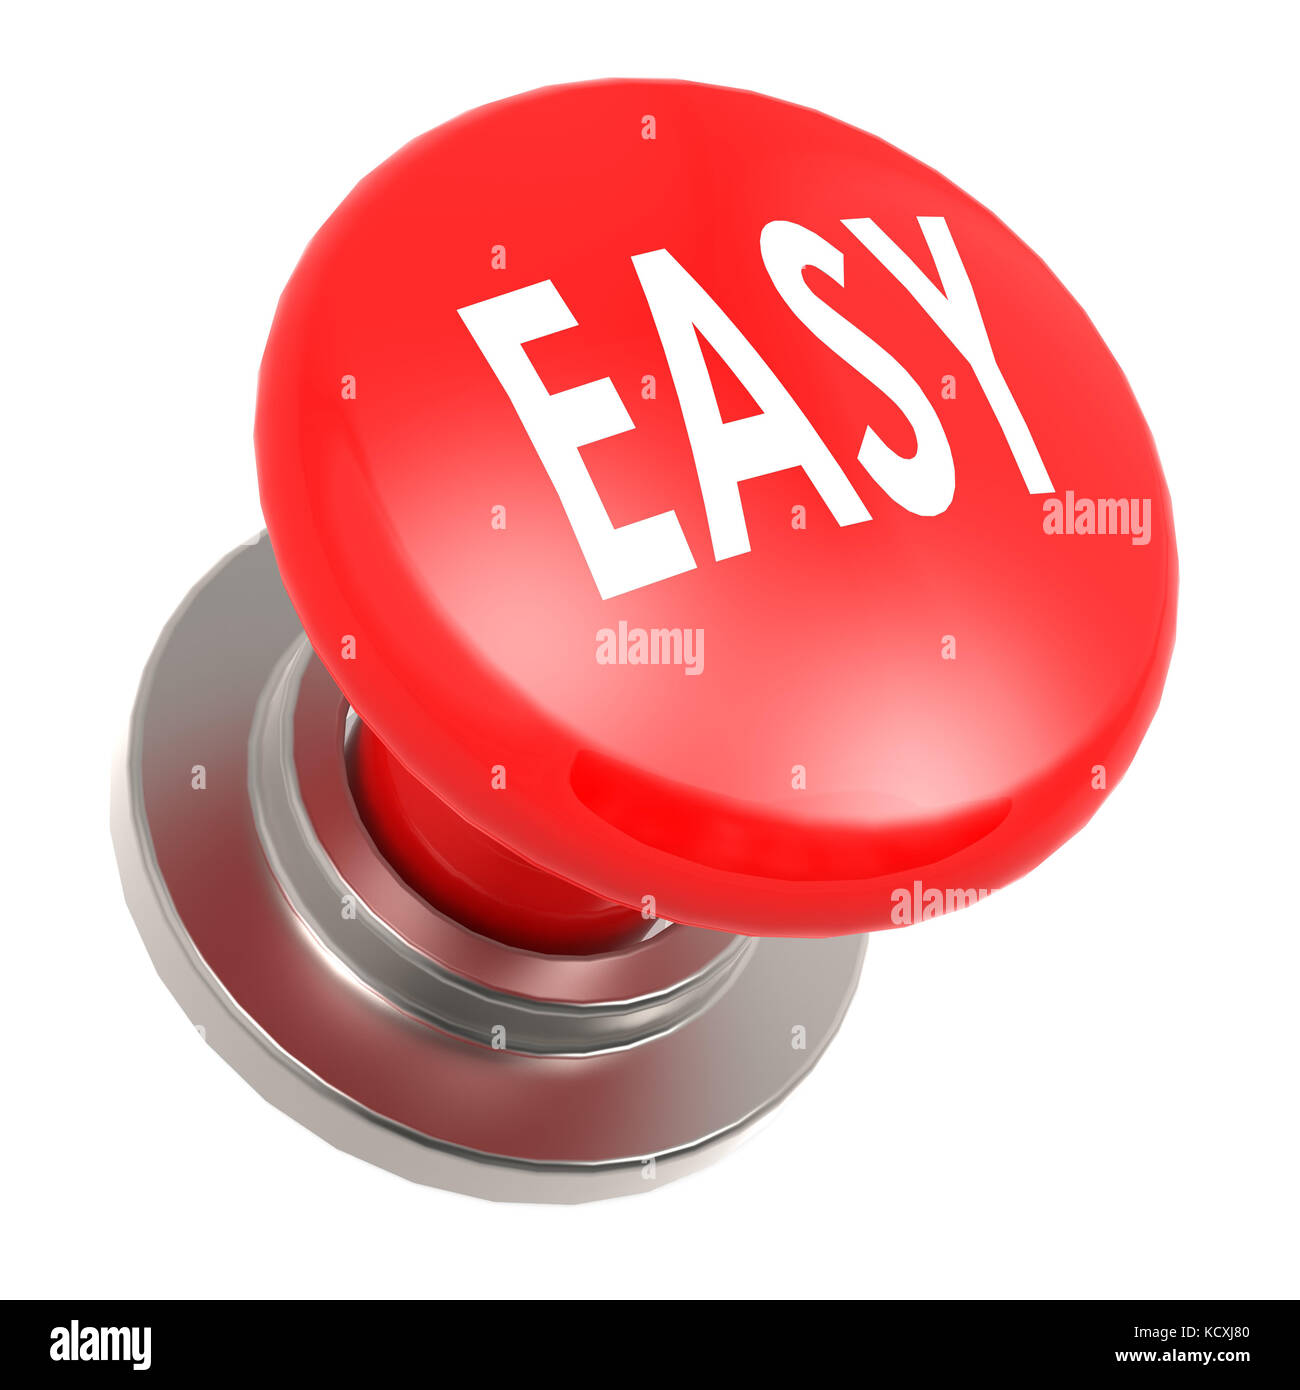 Easy red button image with hi-res rendered artwork that could be used for any graphic design. Stock Photo